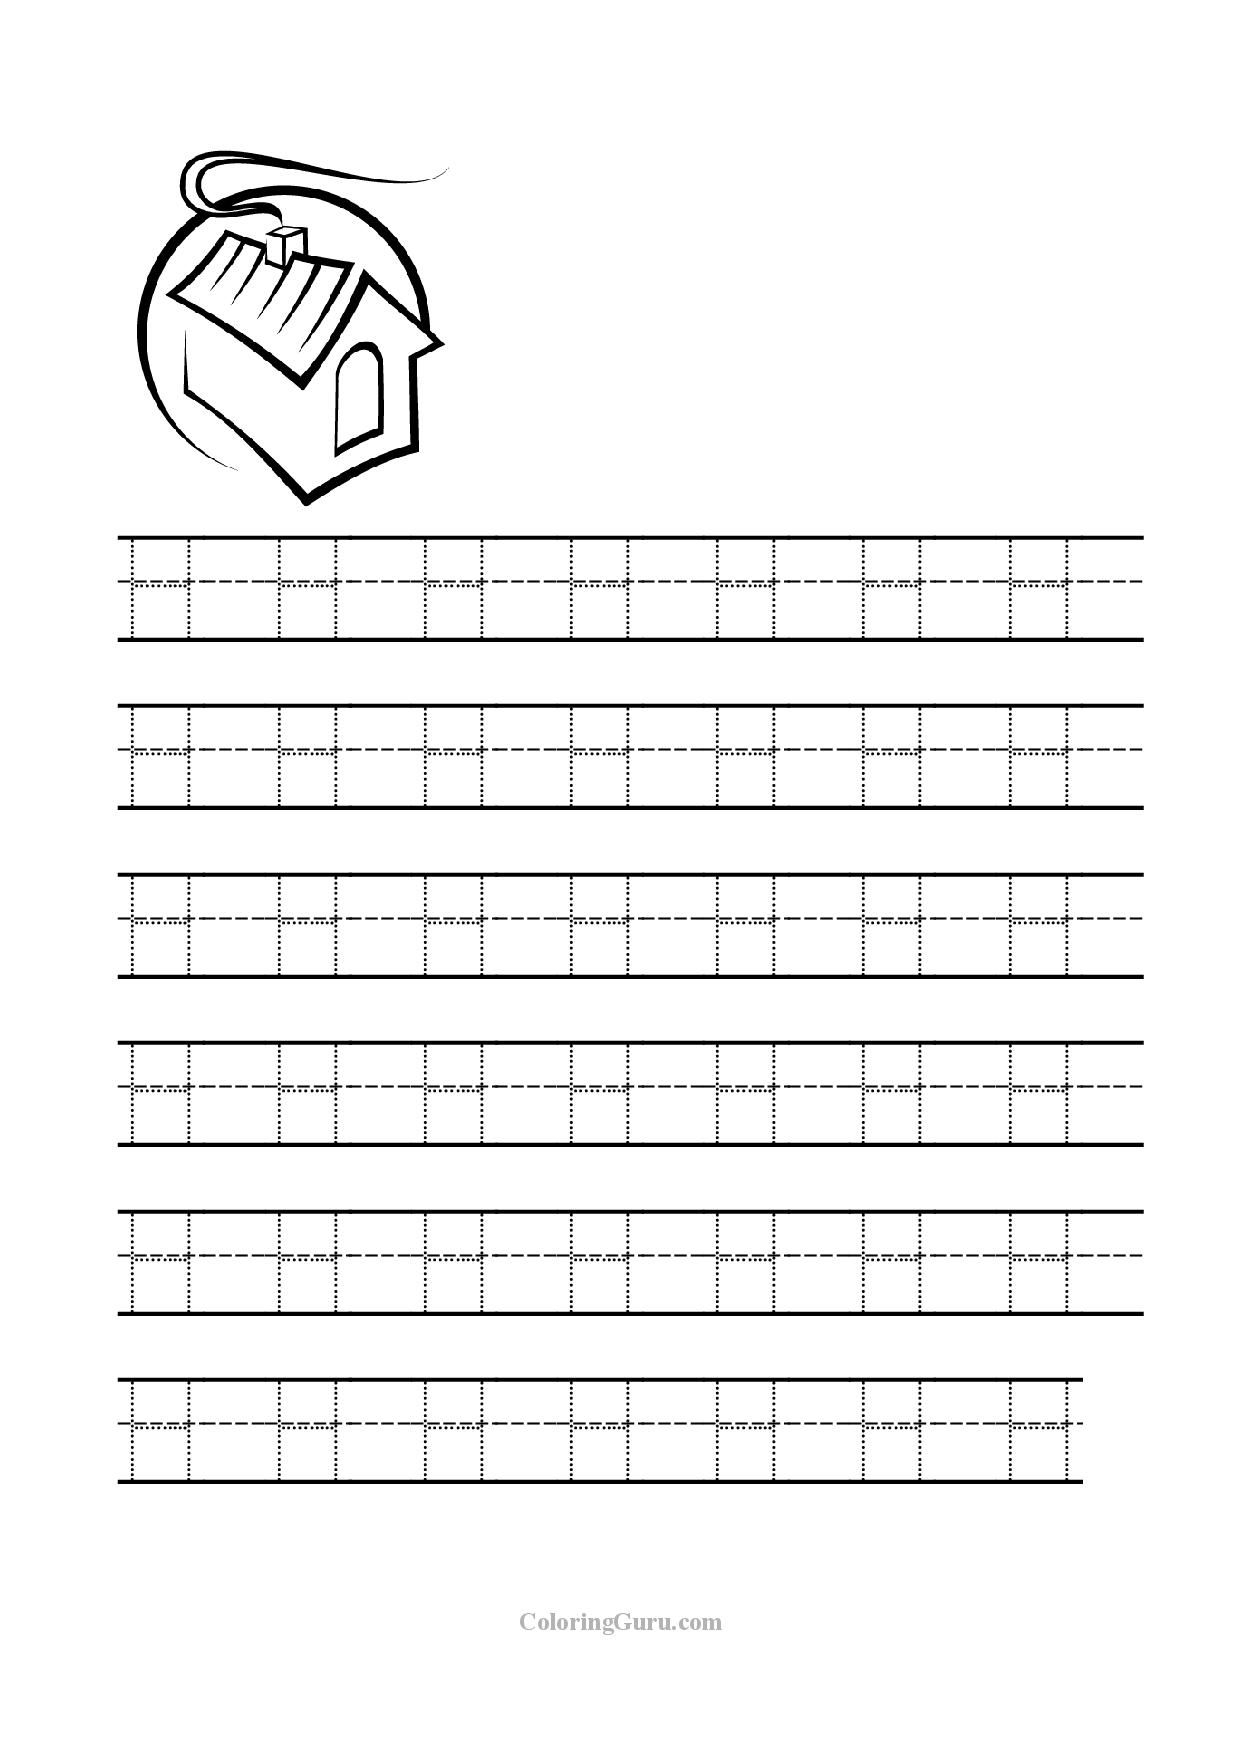 Free Printable Tracing Letter H Worksheets For Preschool for Letter H Tracing Worksheets For Preschool